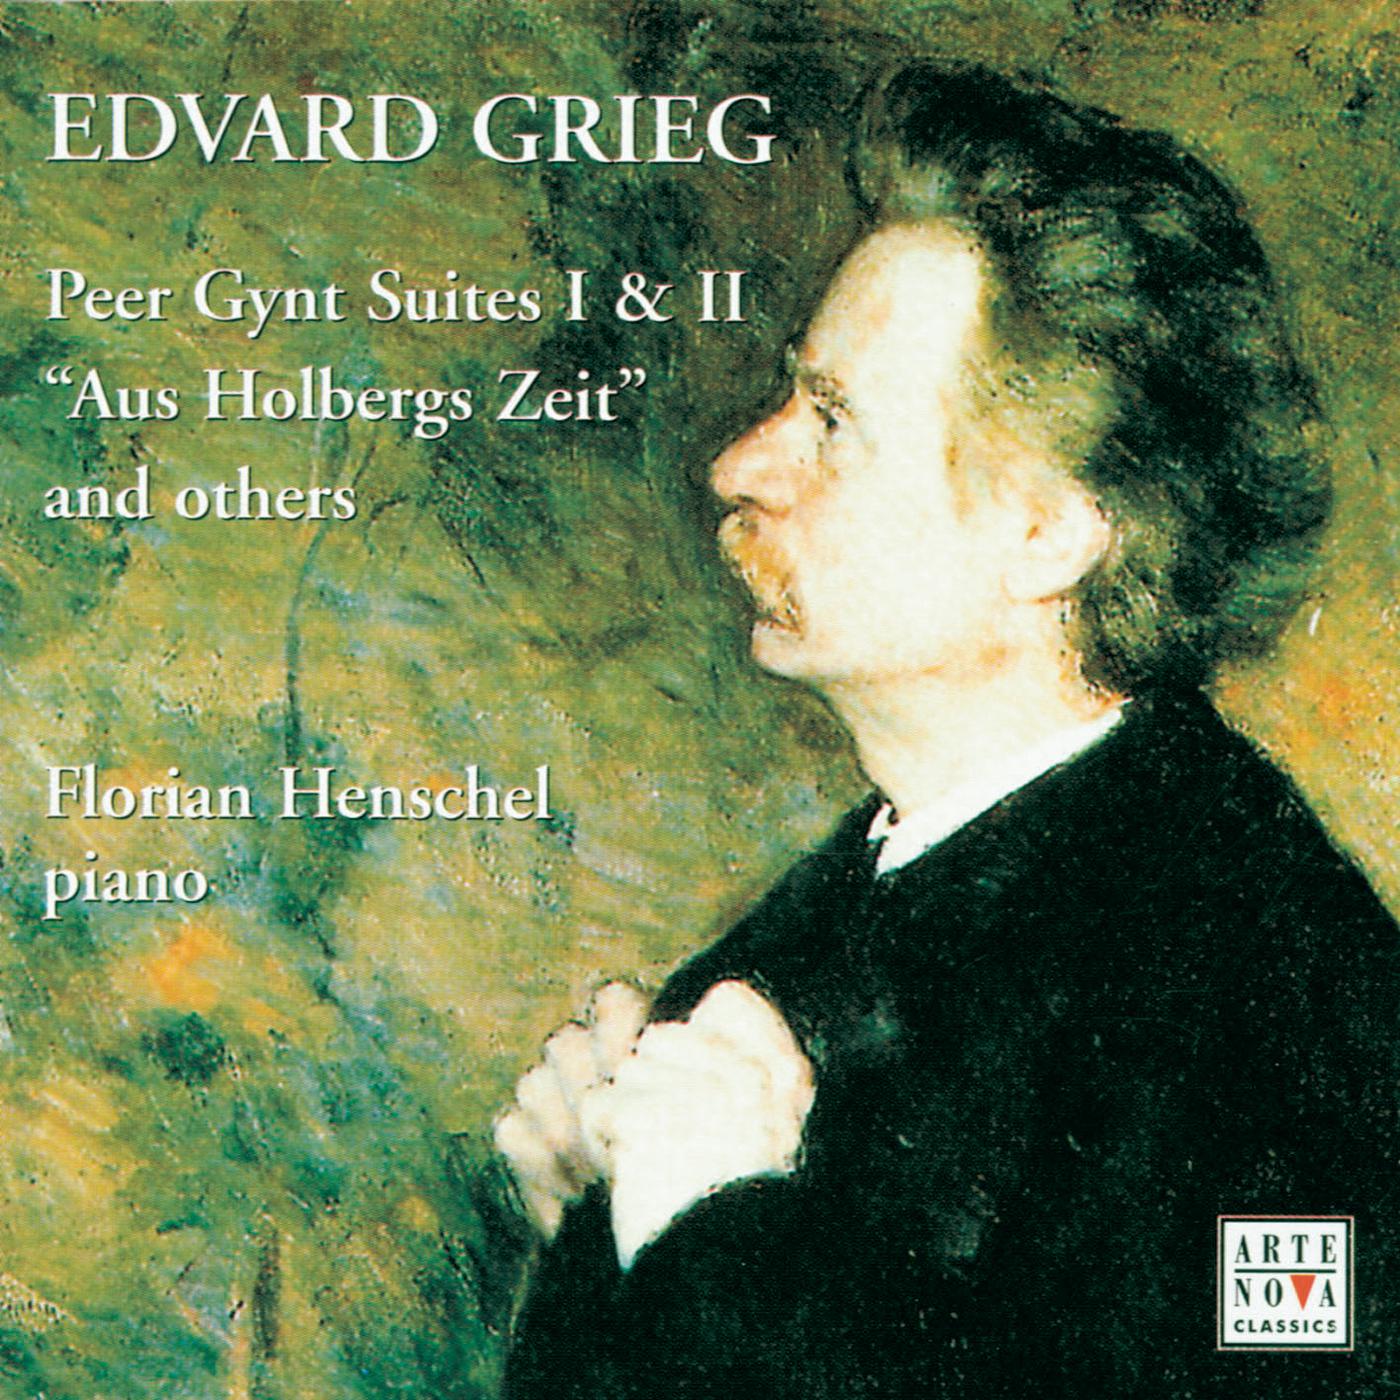 Peer Gynt Suite No. 2, Op. 55, Arr. for Piano:IV. Solveig's Song